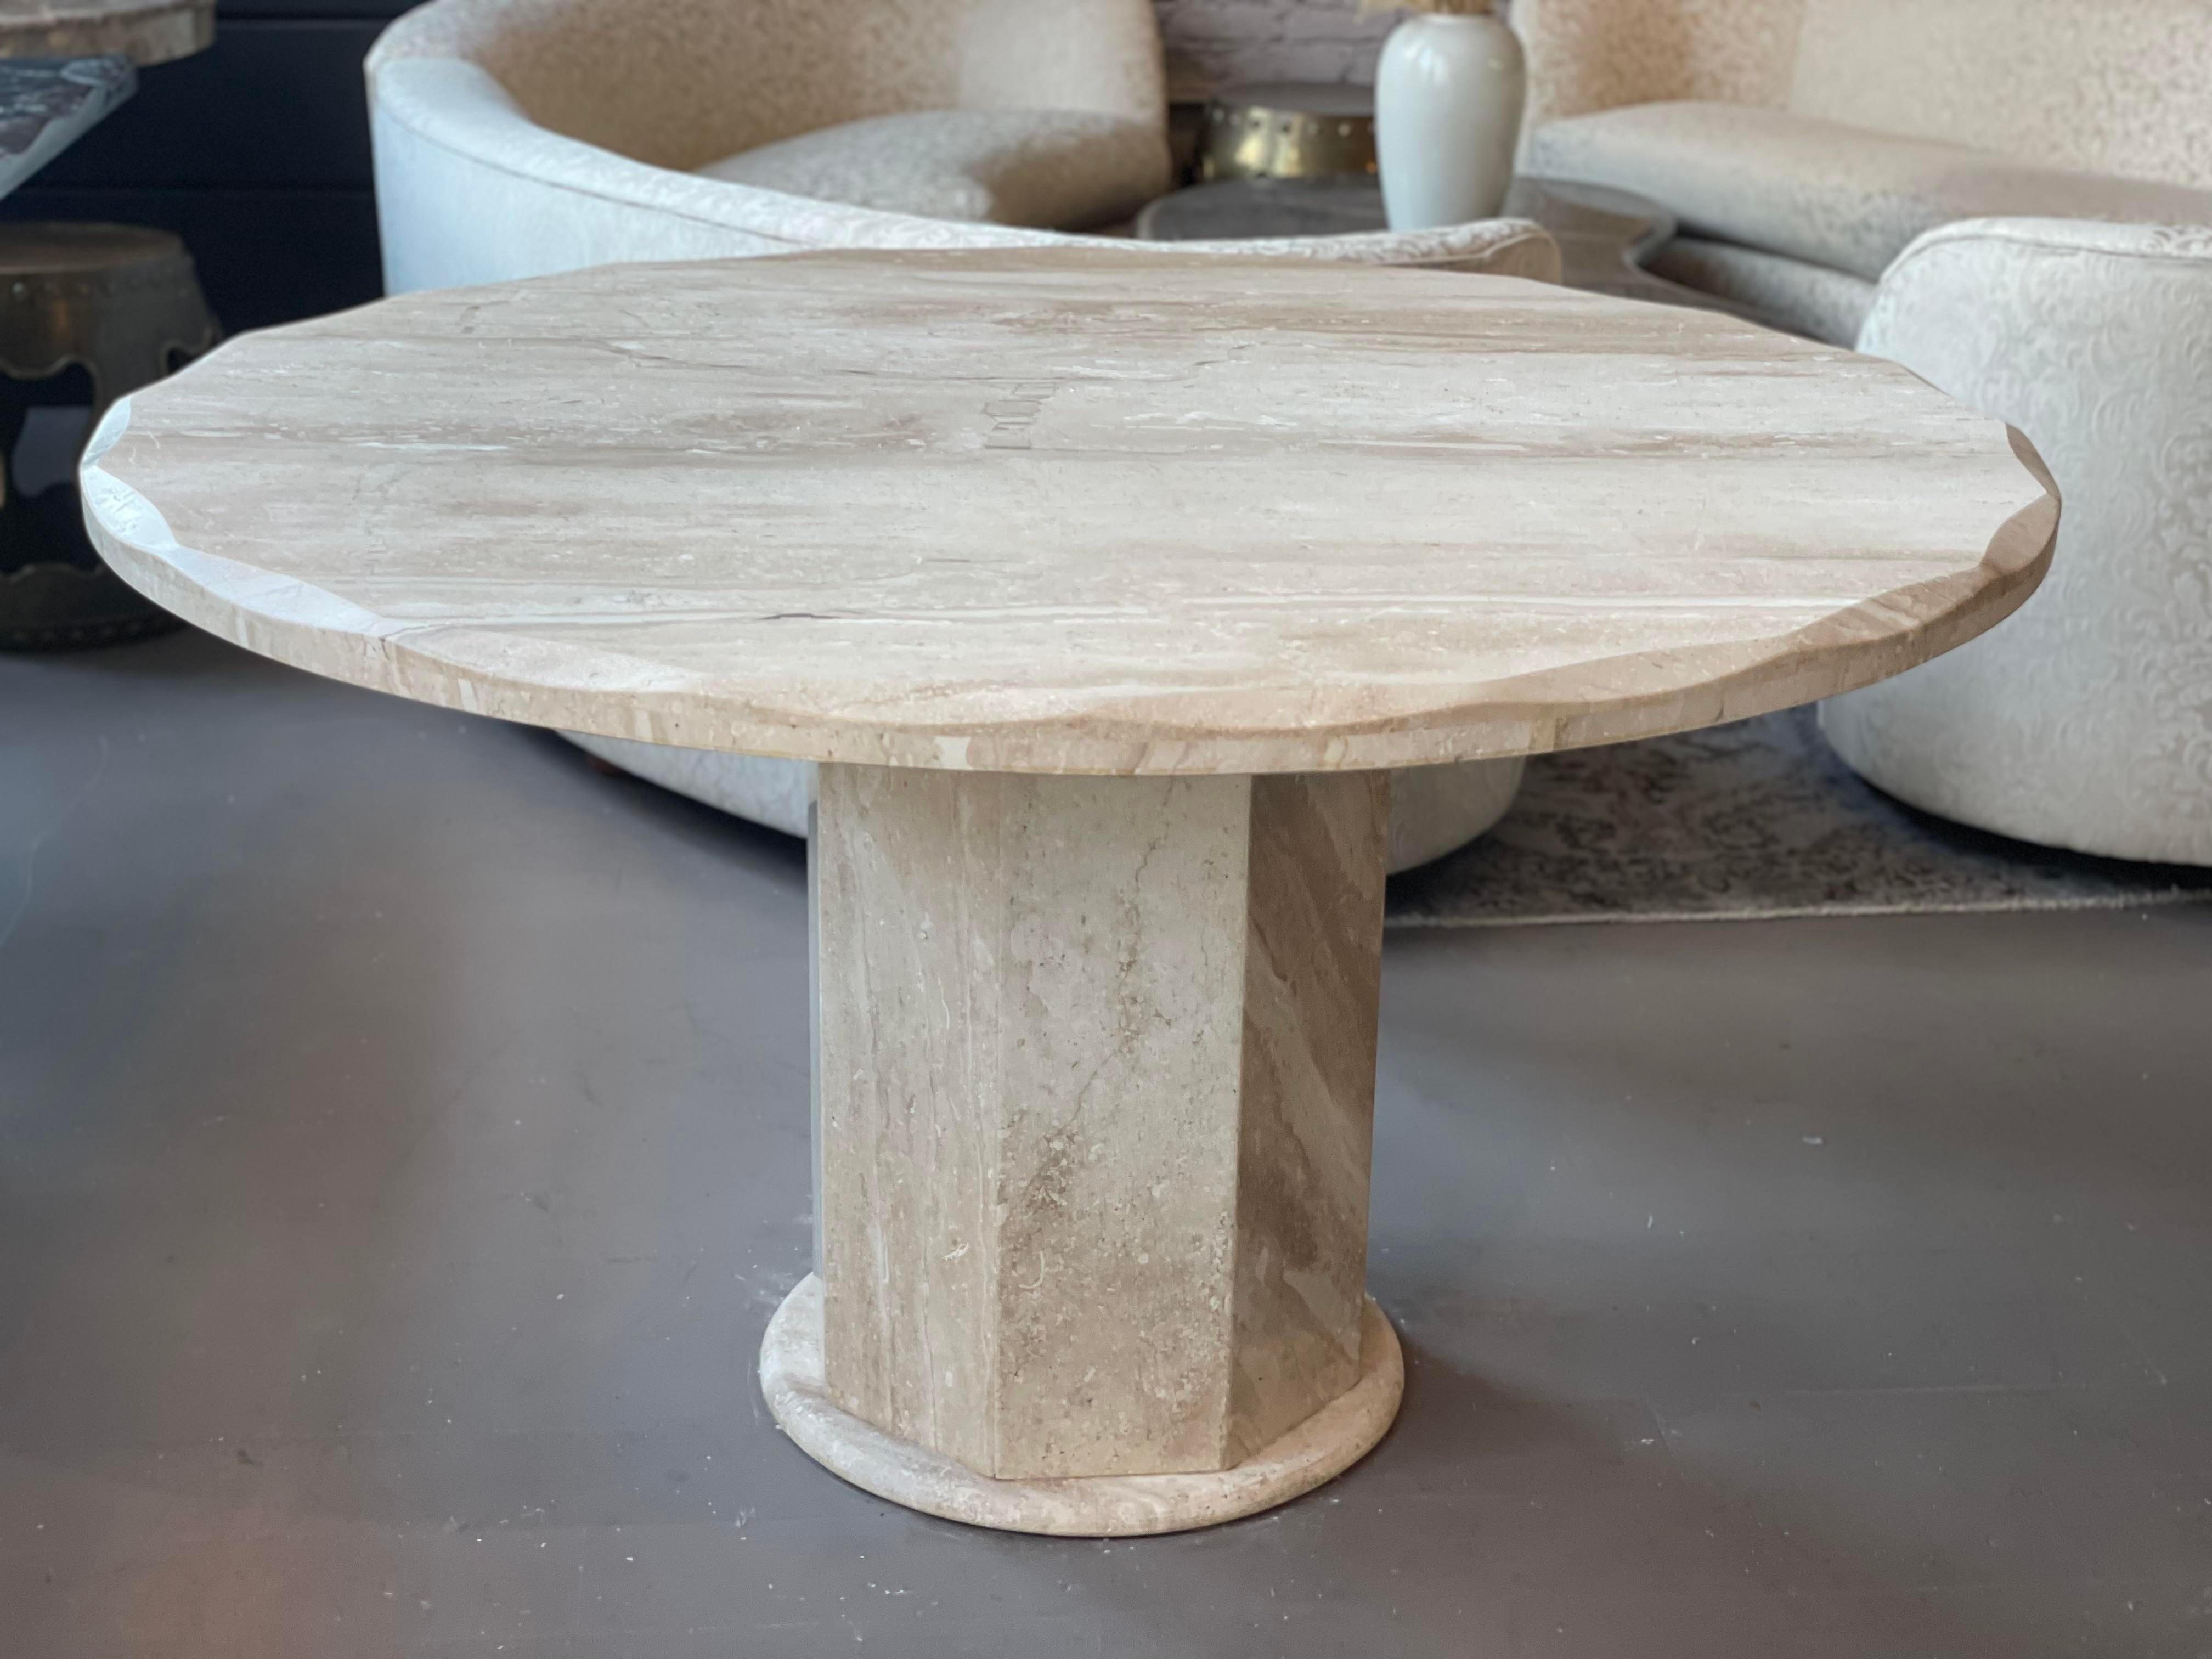 1980s Travertine Scalloped Edge Postmodern Dining Table For Sale 2